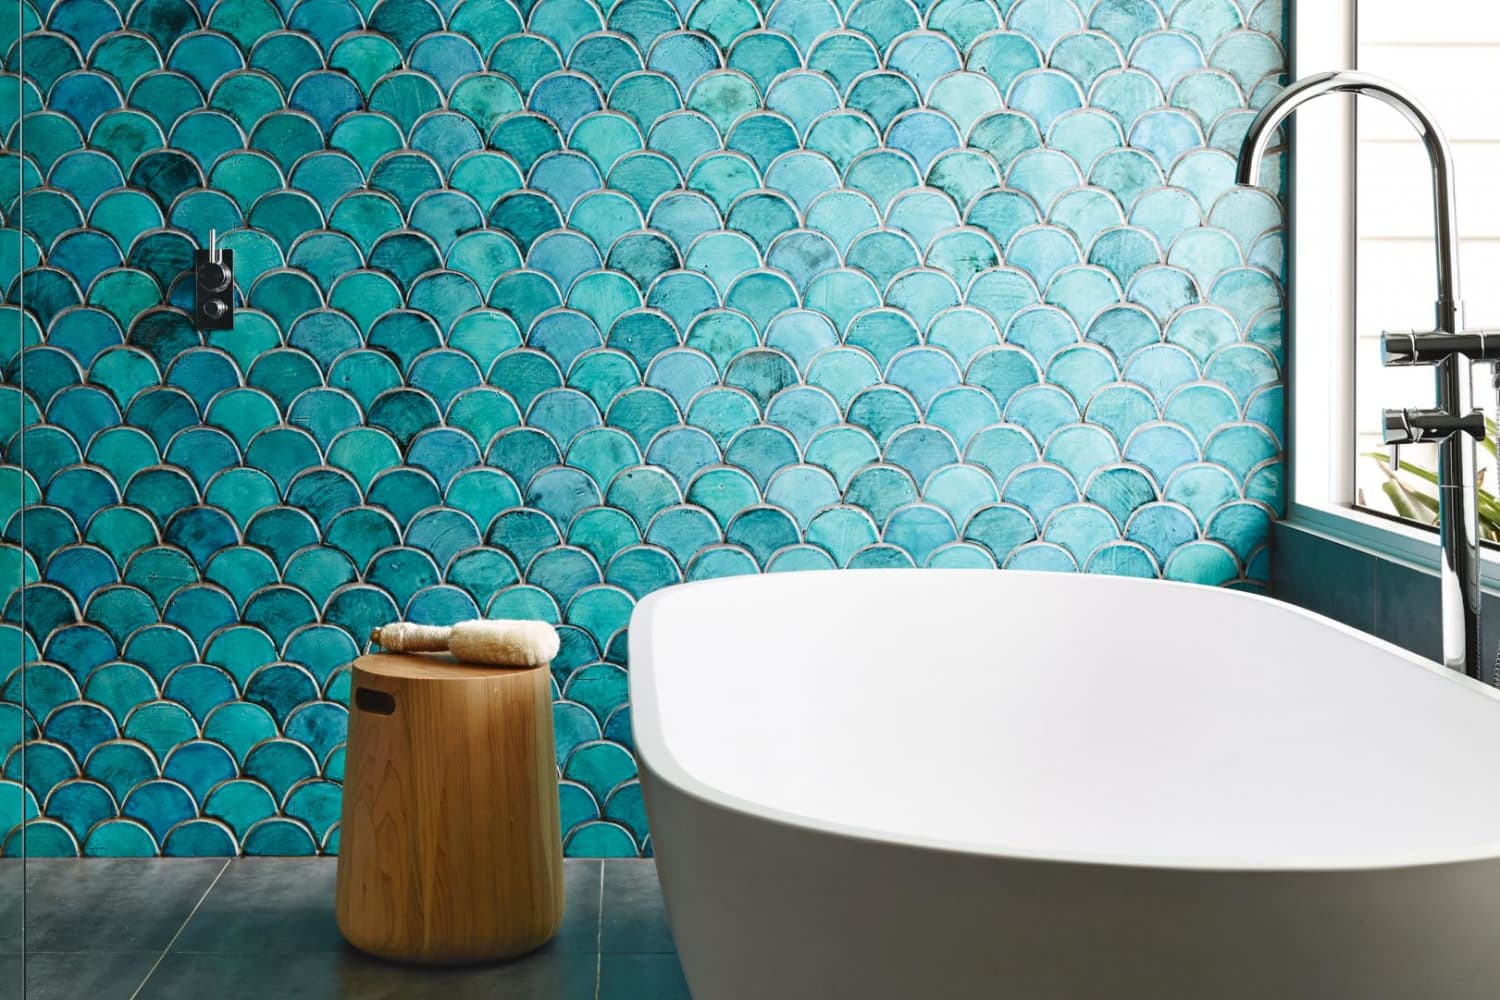 Tile: Best Sources for Fish Scale, Fan & Scallop Design | Apartment Therapy